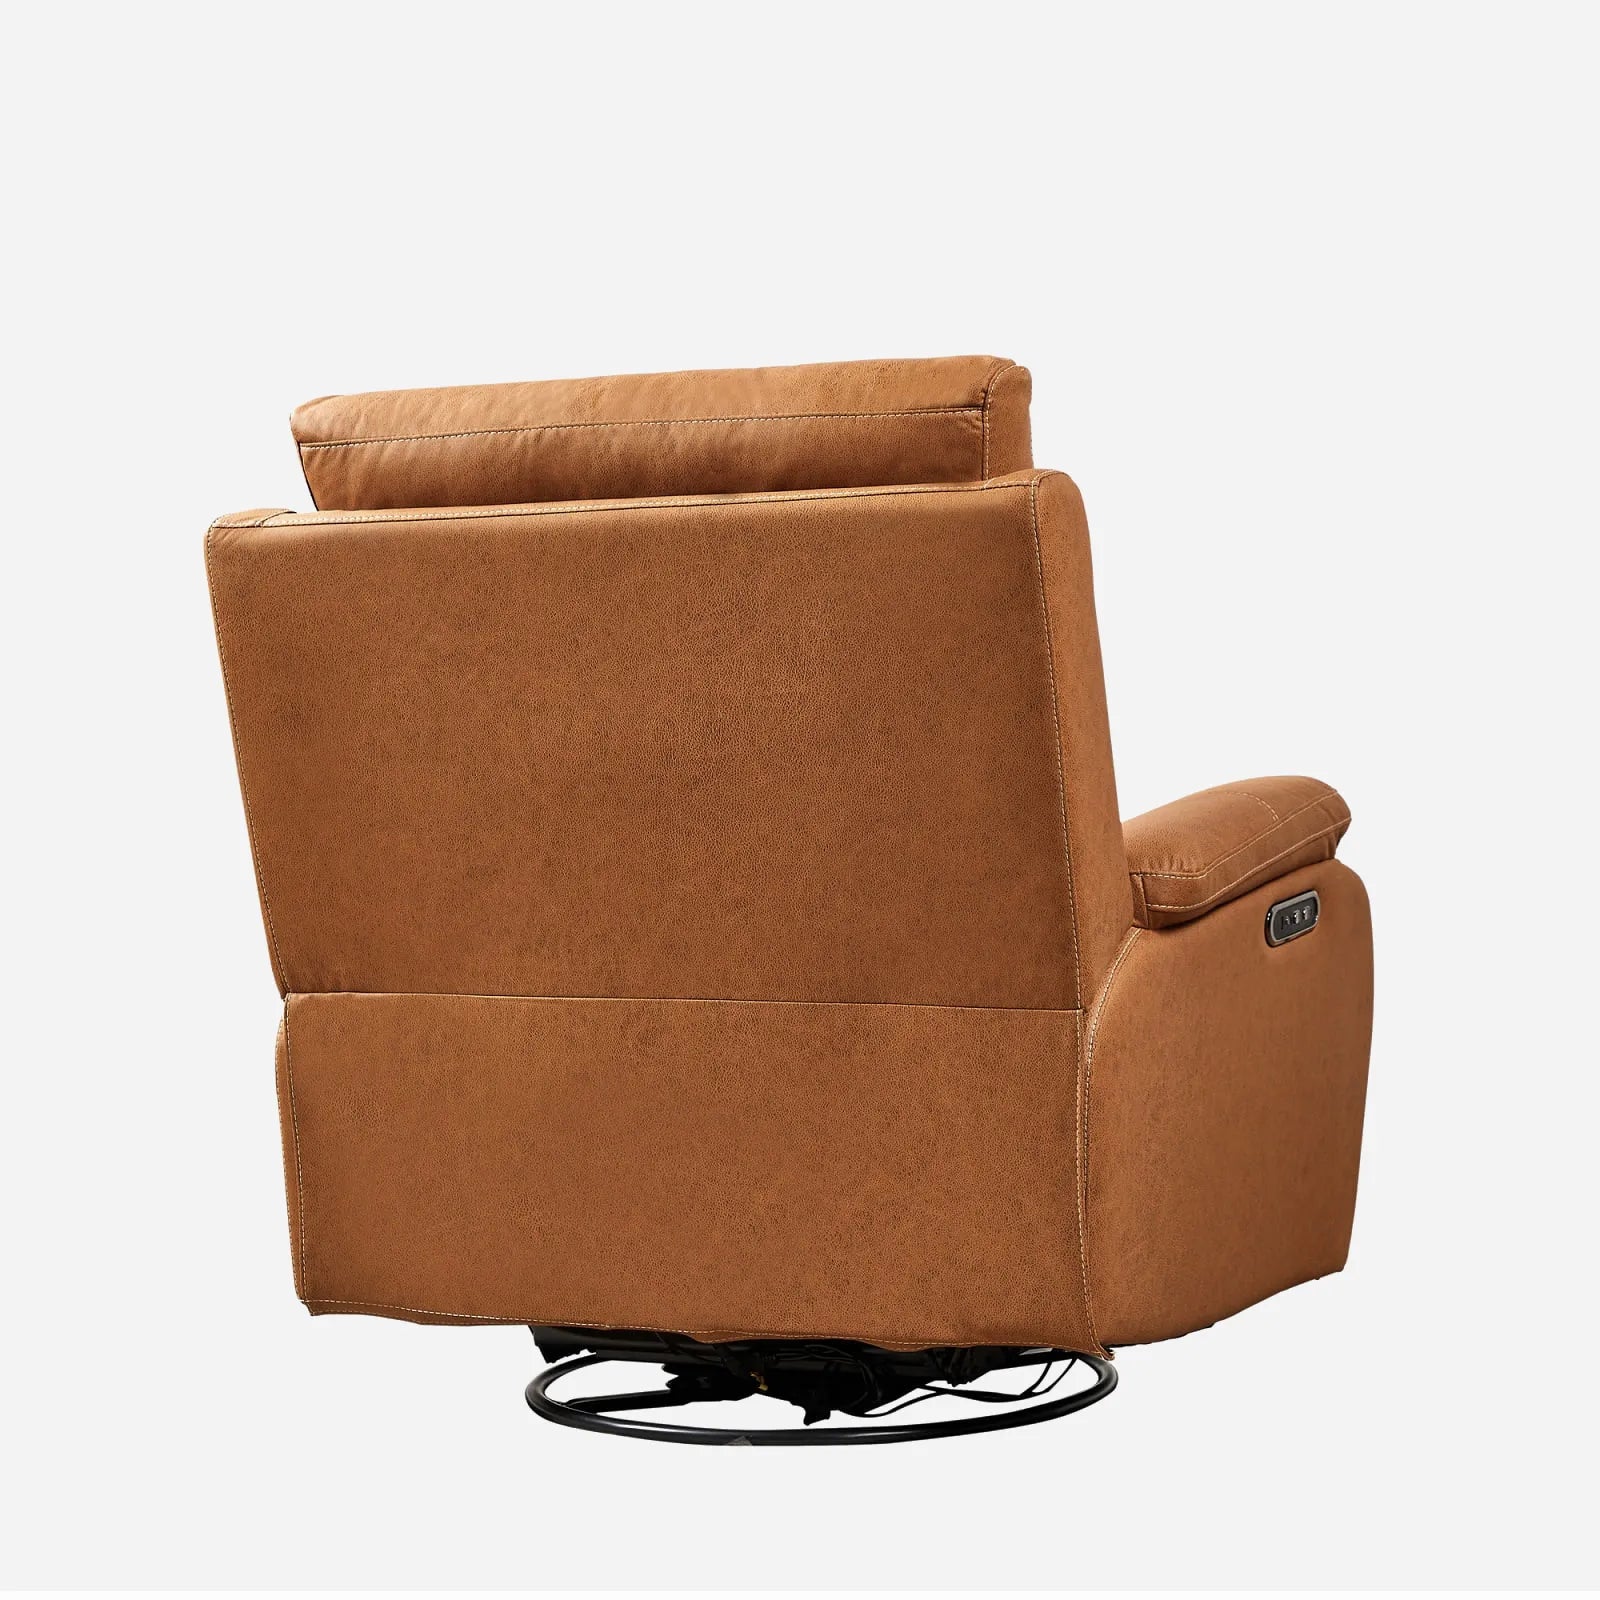 recliner chairs